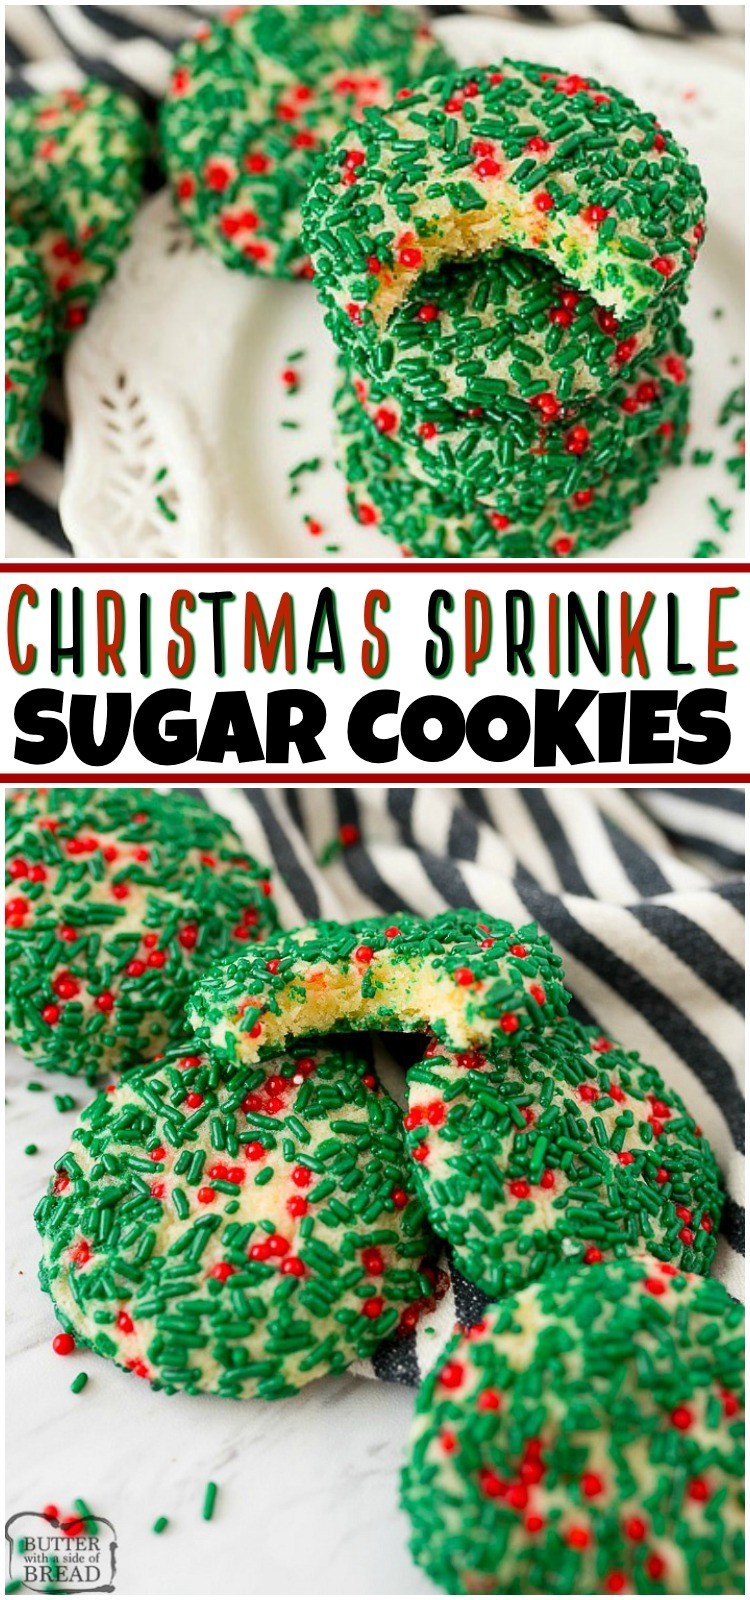 Christmas Sprinkle Cookies are a soft and chewy vanilla sugar cookie covered with red and green sprinkles. Just like the sprinkle cookies made at a bakery, these Christmas Cookies are deliciously festive! #Christmas #sprinkles #sugarcookies #cookies #baking #dessert #Santa #recipe from BUTTER WITH A SIDE OF BREAD